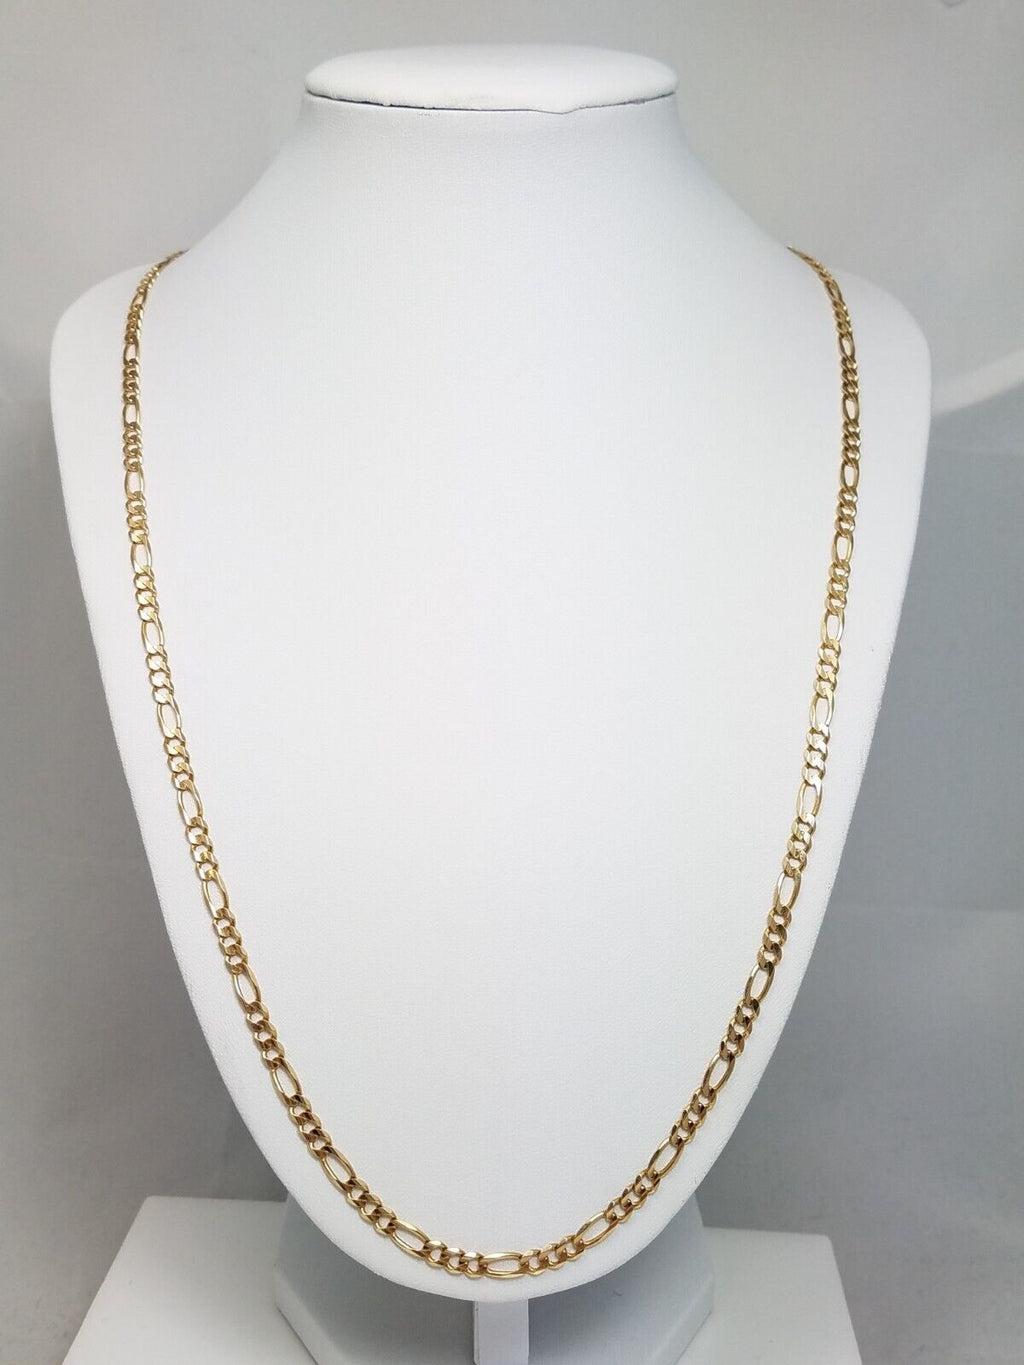 24" 14k Solid Yellow Gold Concave Figaro Chain Necklace